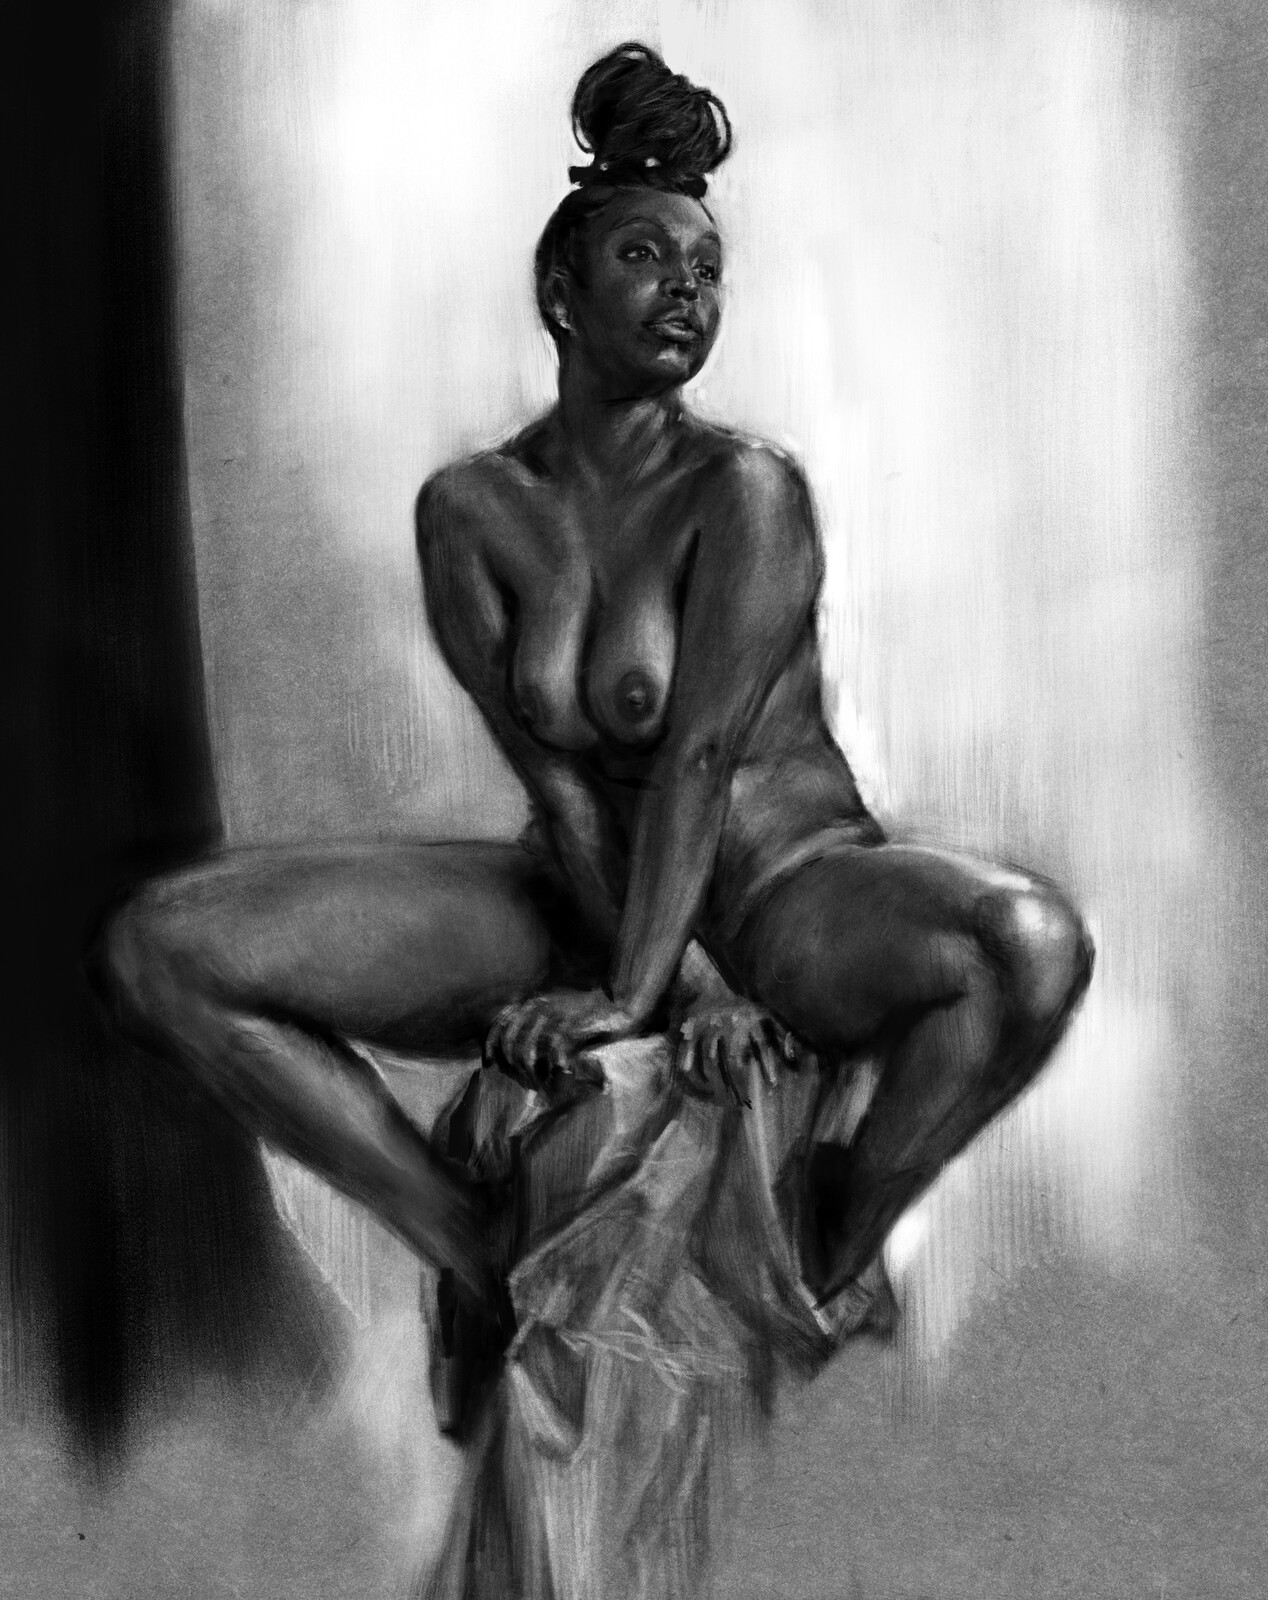 Demo's from Life Drawing